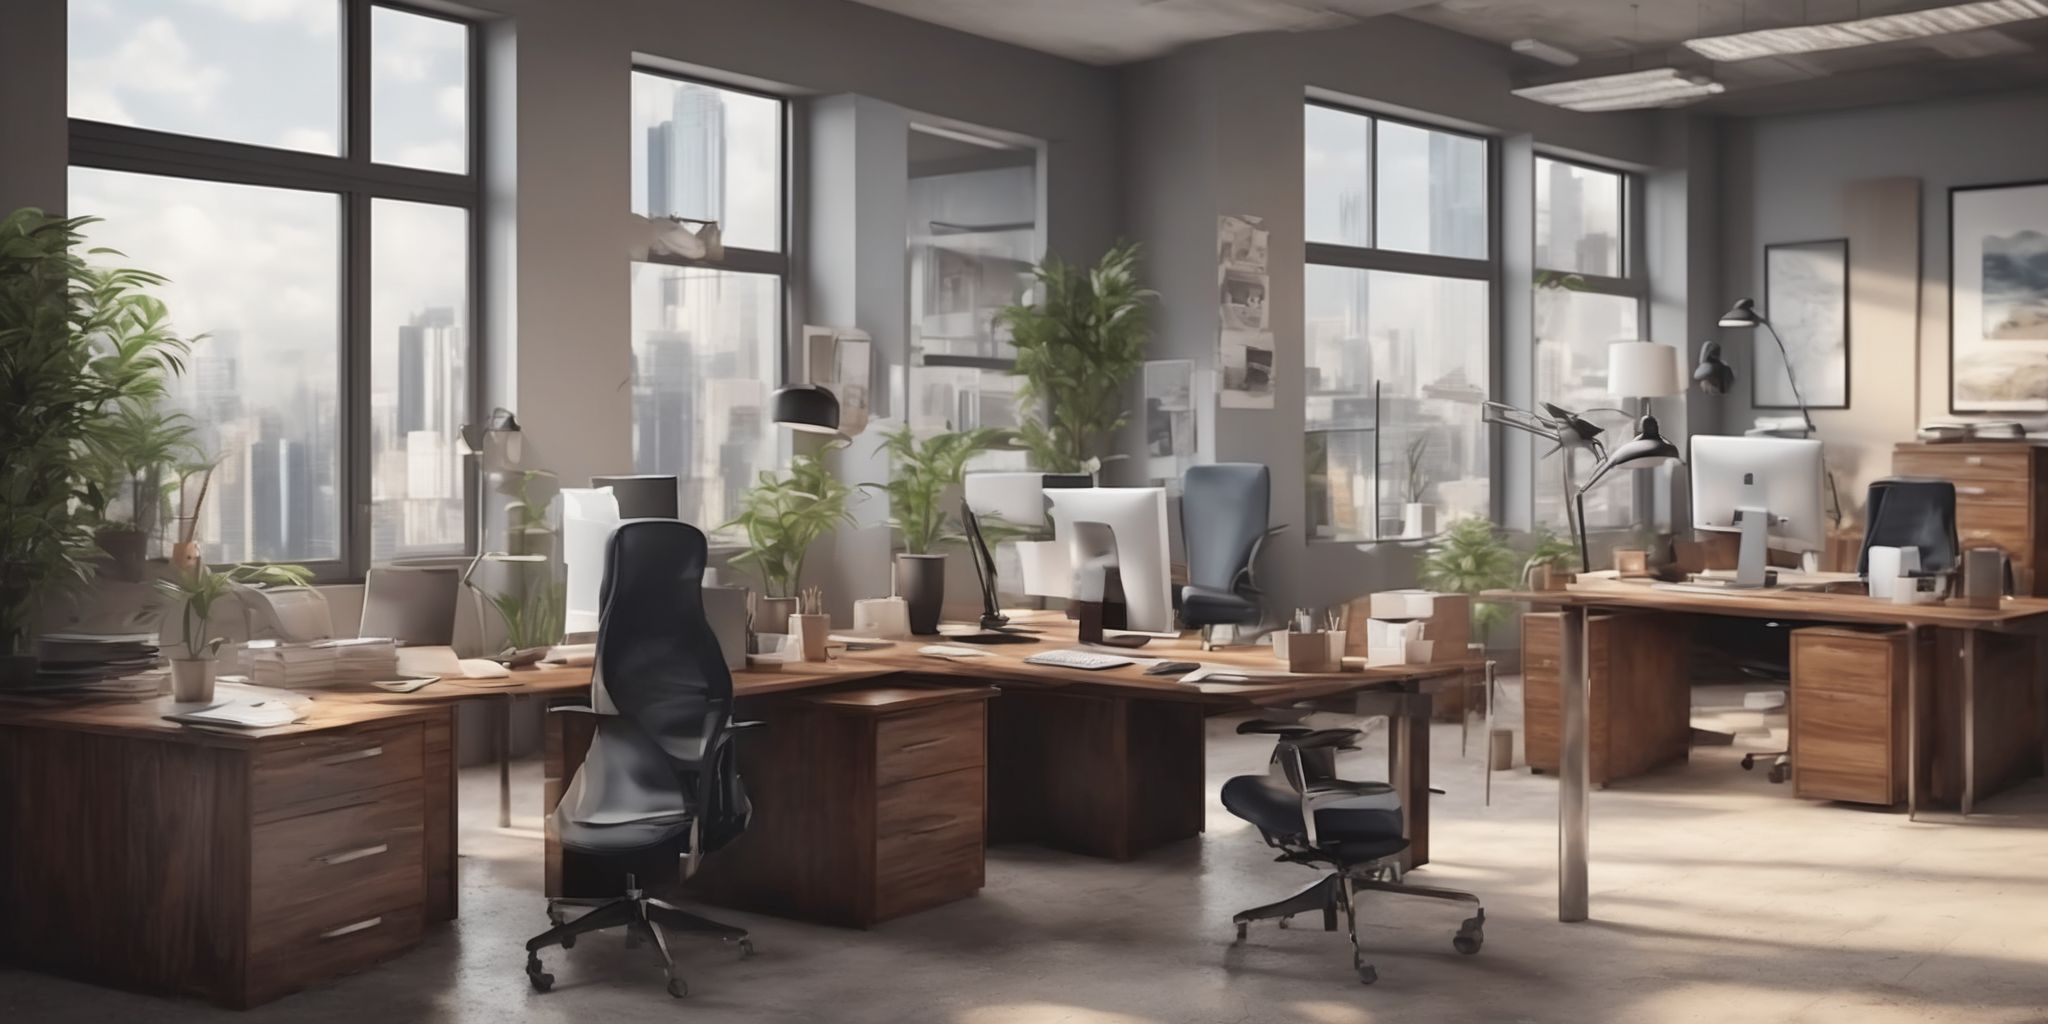 Office  in realistic, photographic style